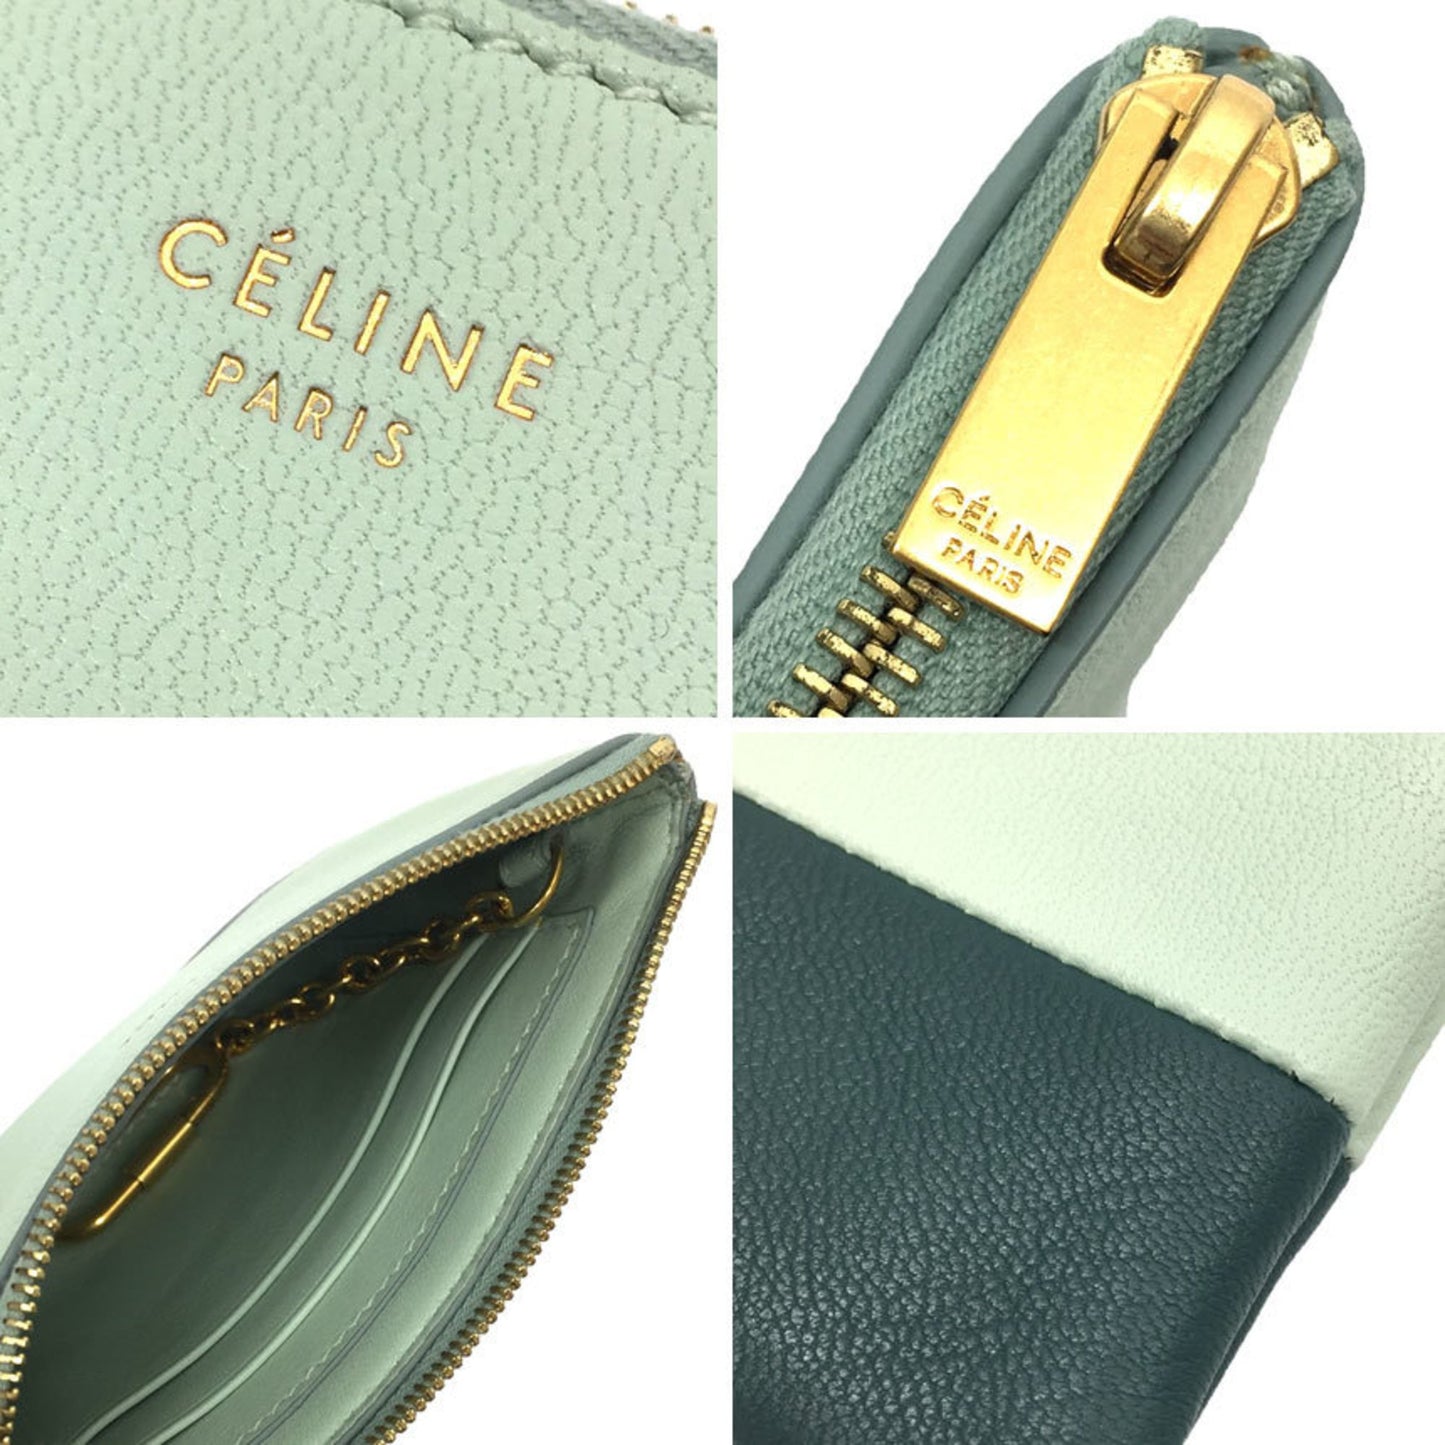 Celine Women's Luxurious Green Leather Coin Purse/Coin Case by Celine in Green